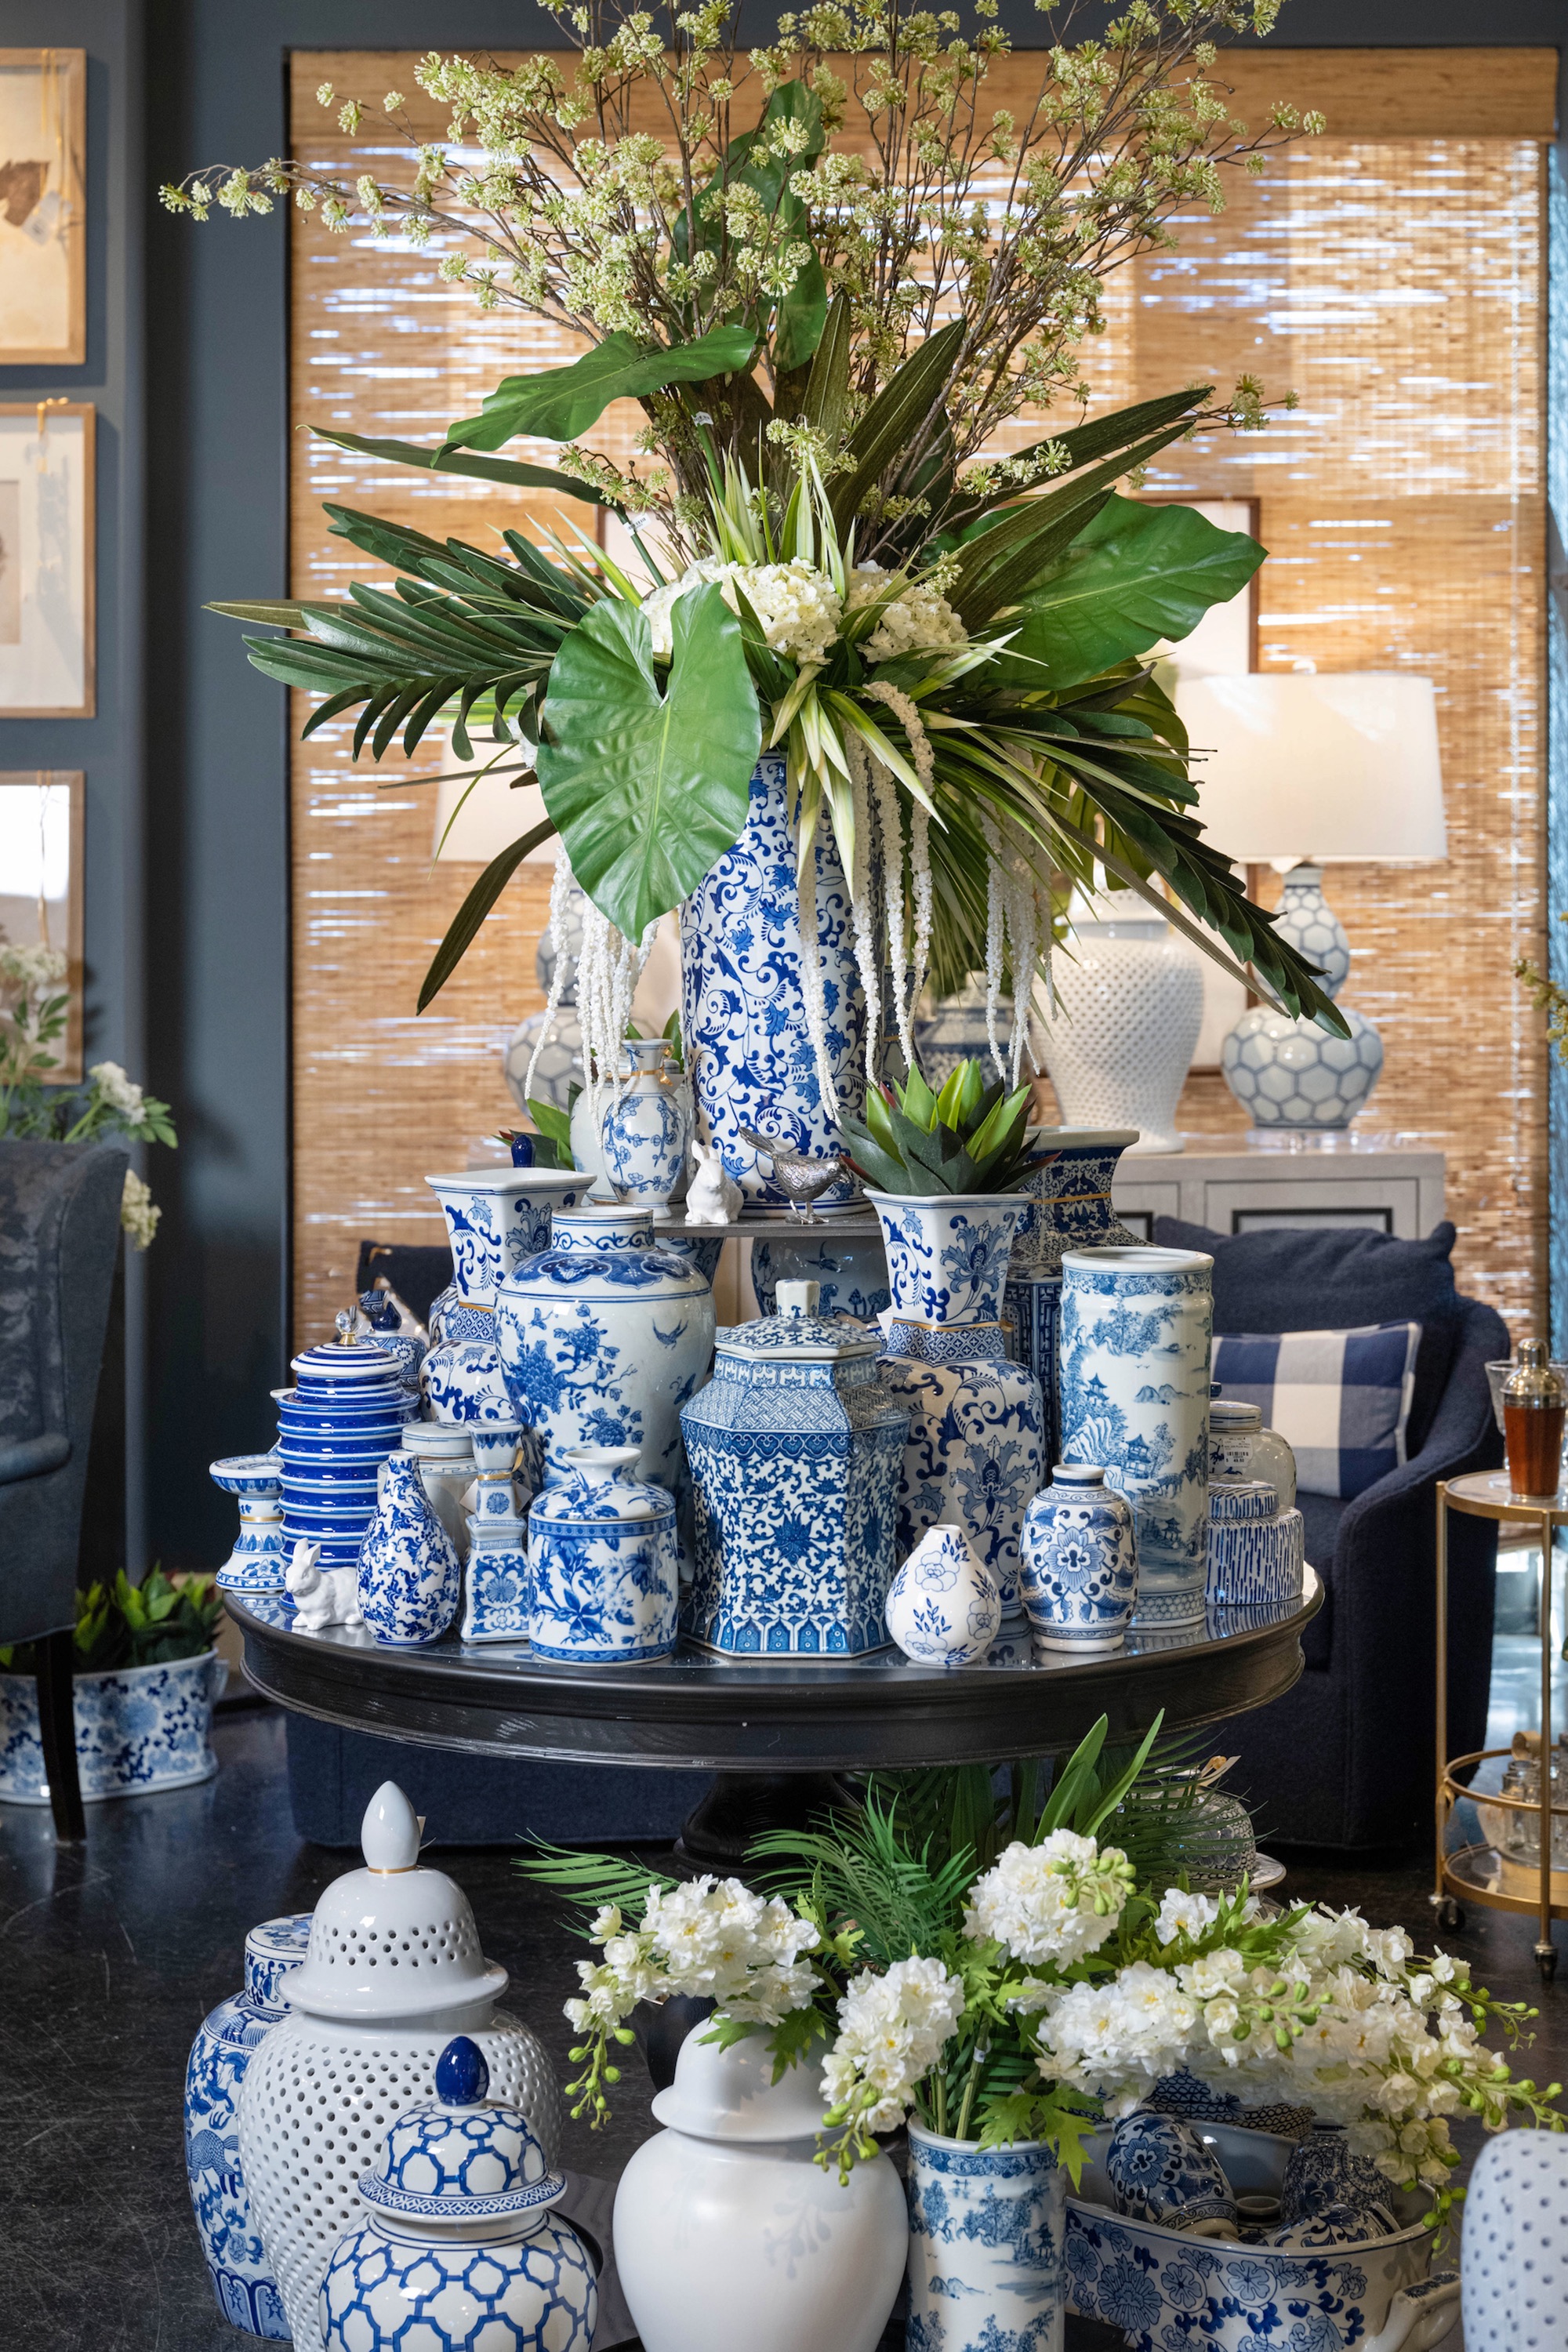 In this display, tulips, hydrangeas and drooping floral stems are the monochromatic base from which tropical greenery bursts. Monstera leaves and spiky palm fronds are mixed throughout, providing visual interest on all sides of the piece. 